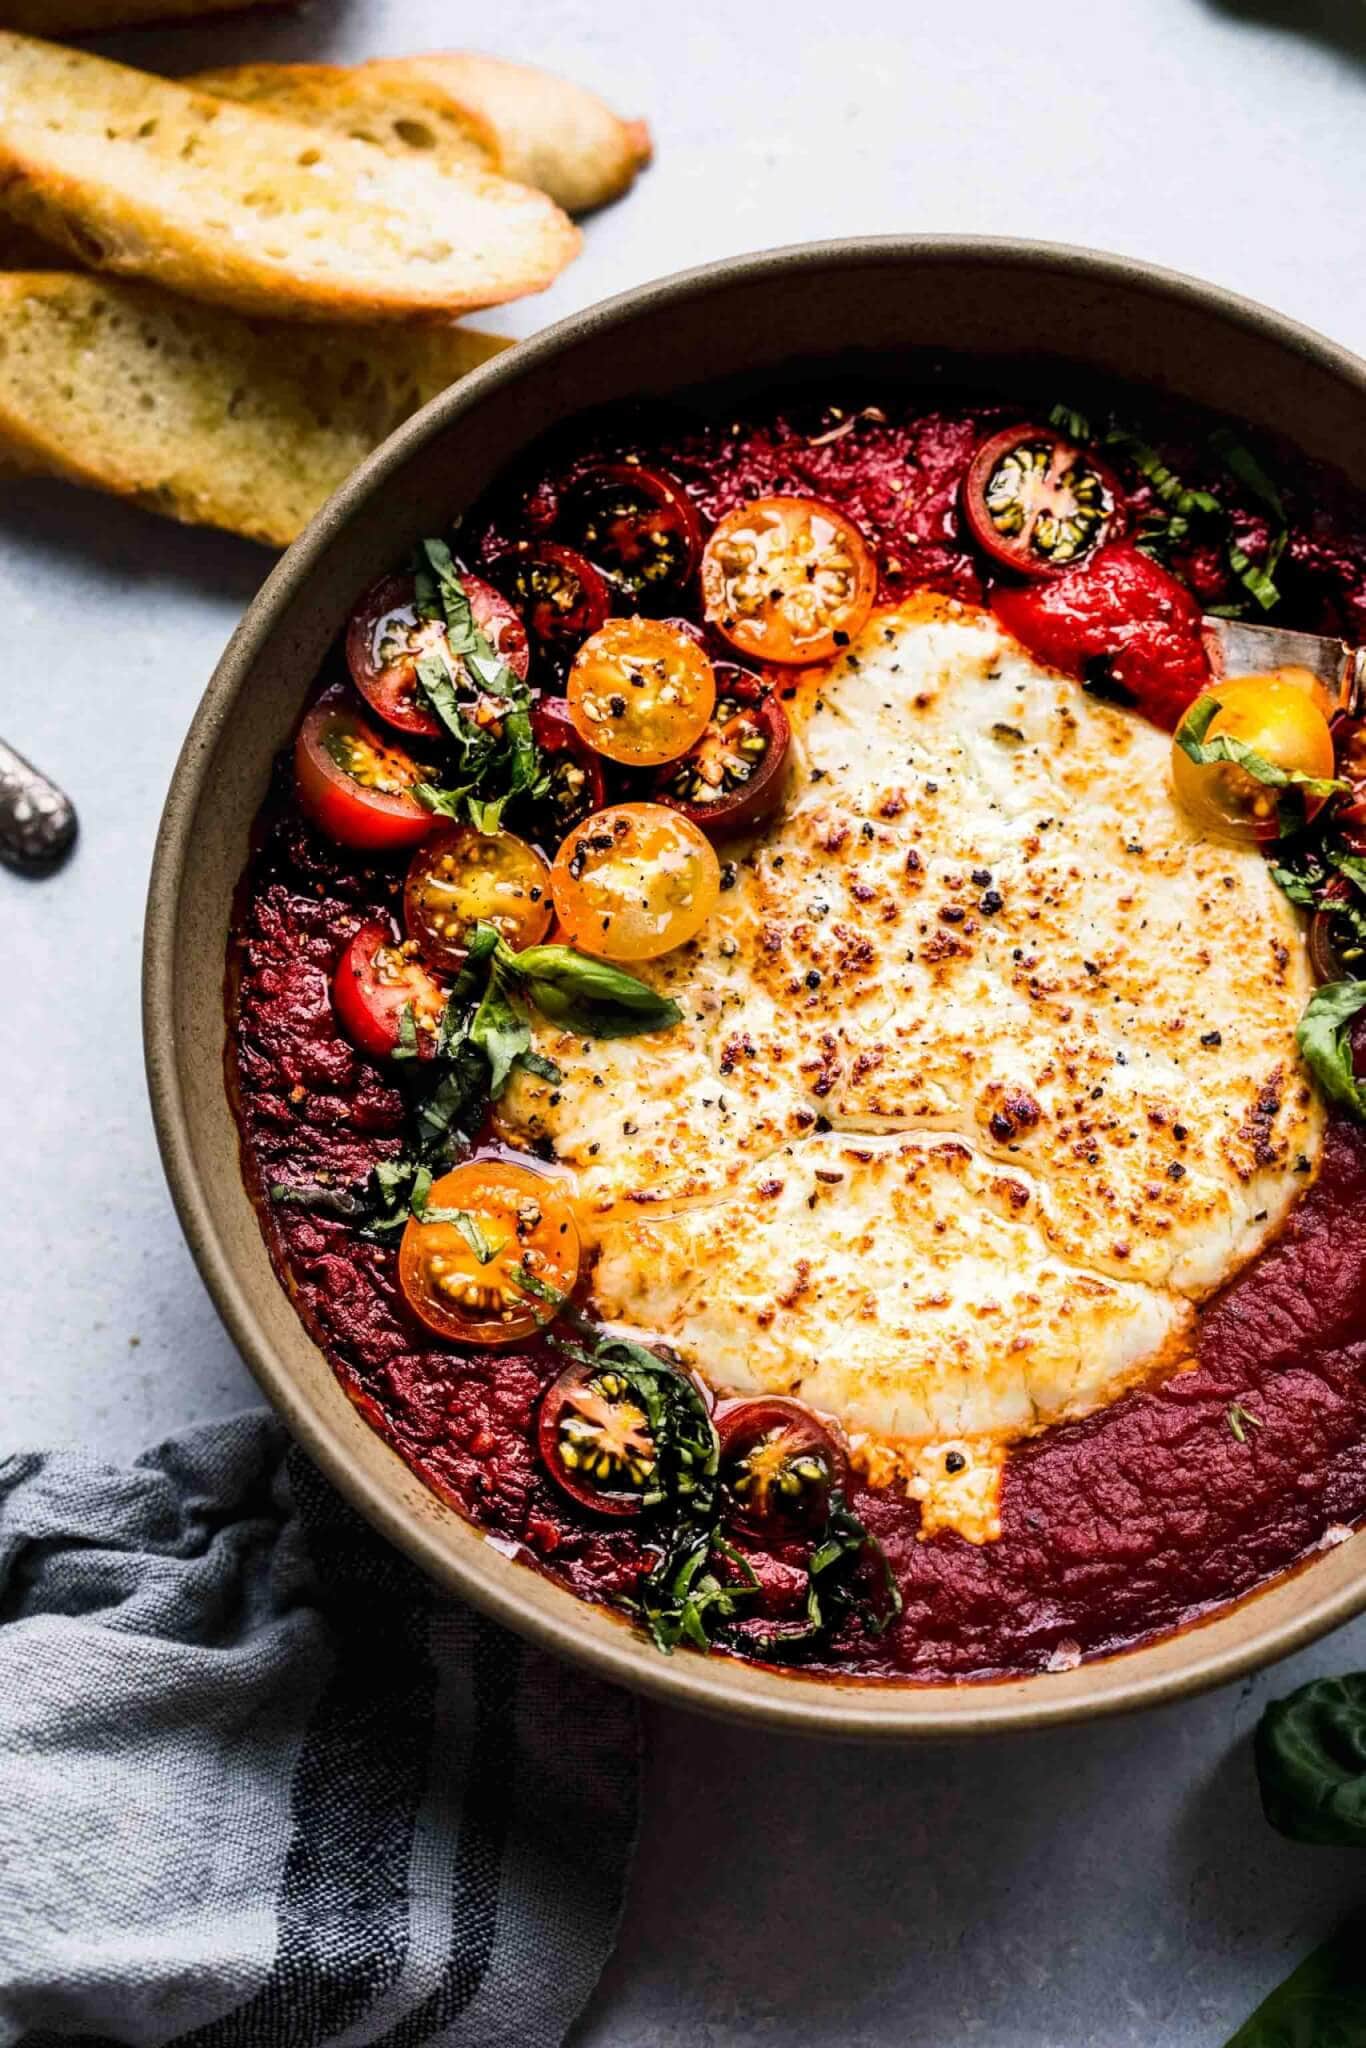 This baked goat cheese dip is a super simple appetizer recipe that's easy to throw together at the last minute with just 3 ingredients! Chevre is baked in marinara sauce until hot and bubbly – Perfect for spreading on crostini.